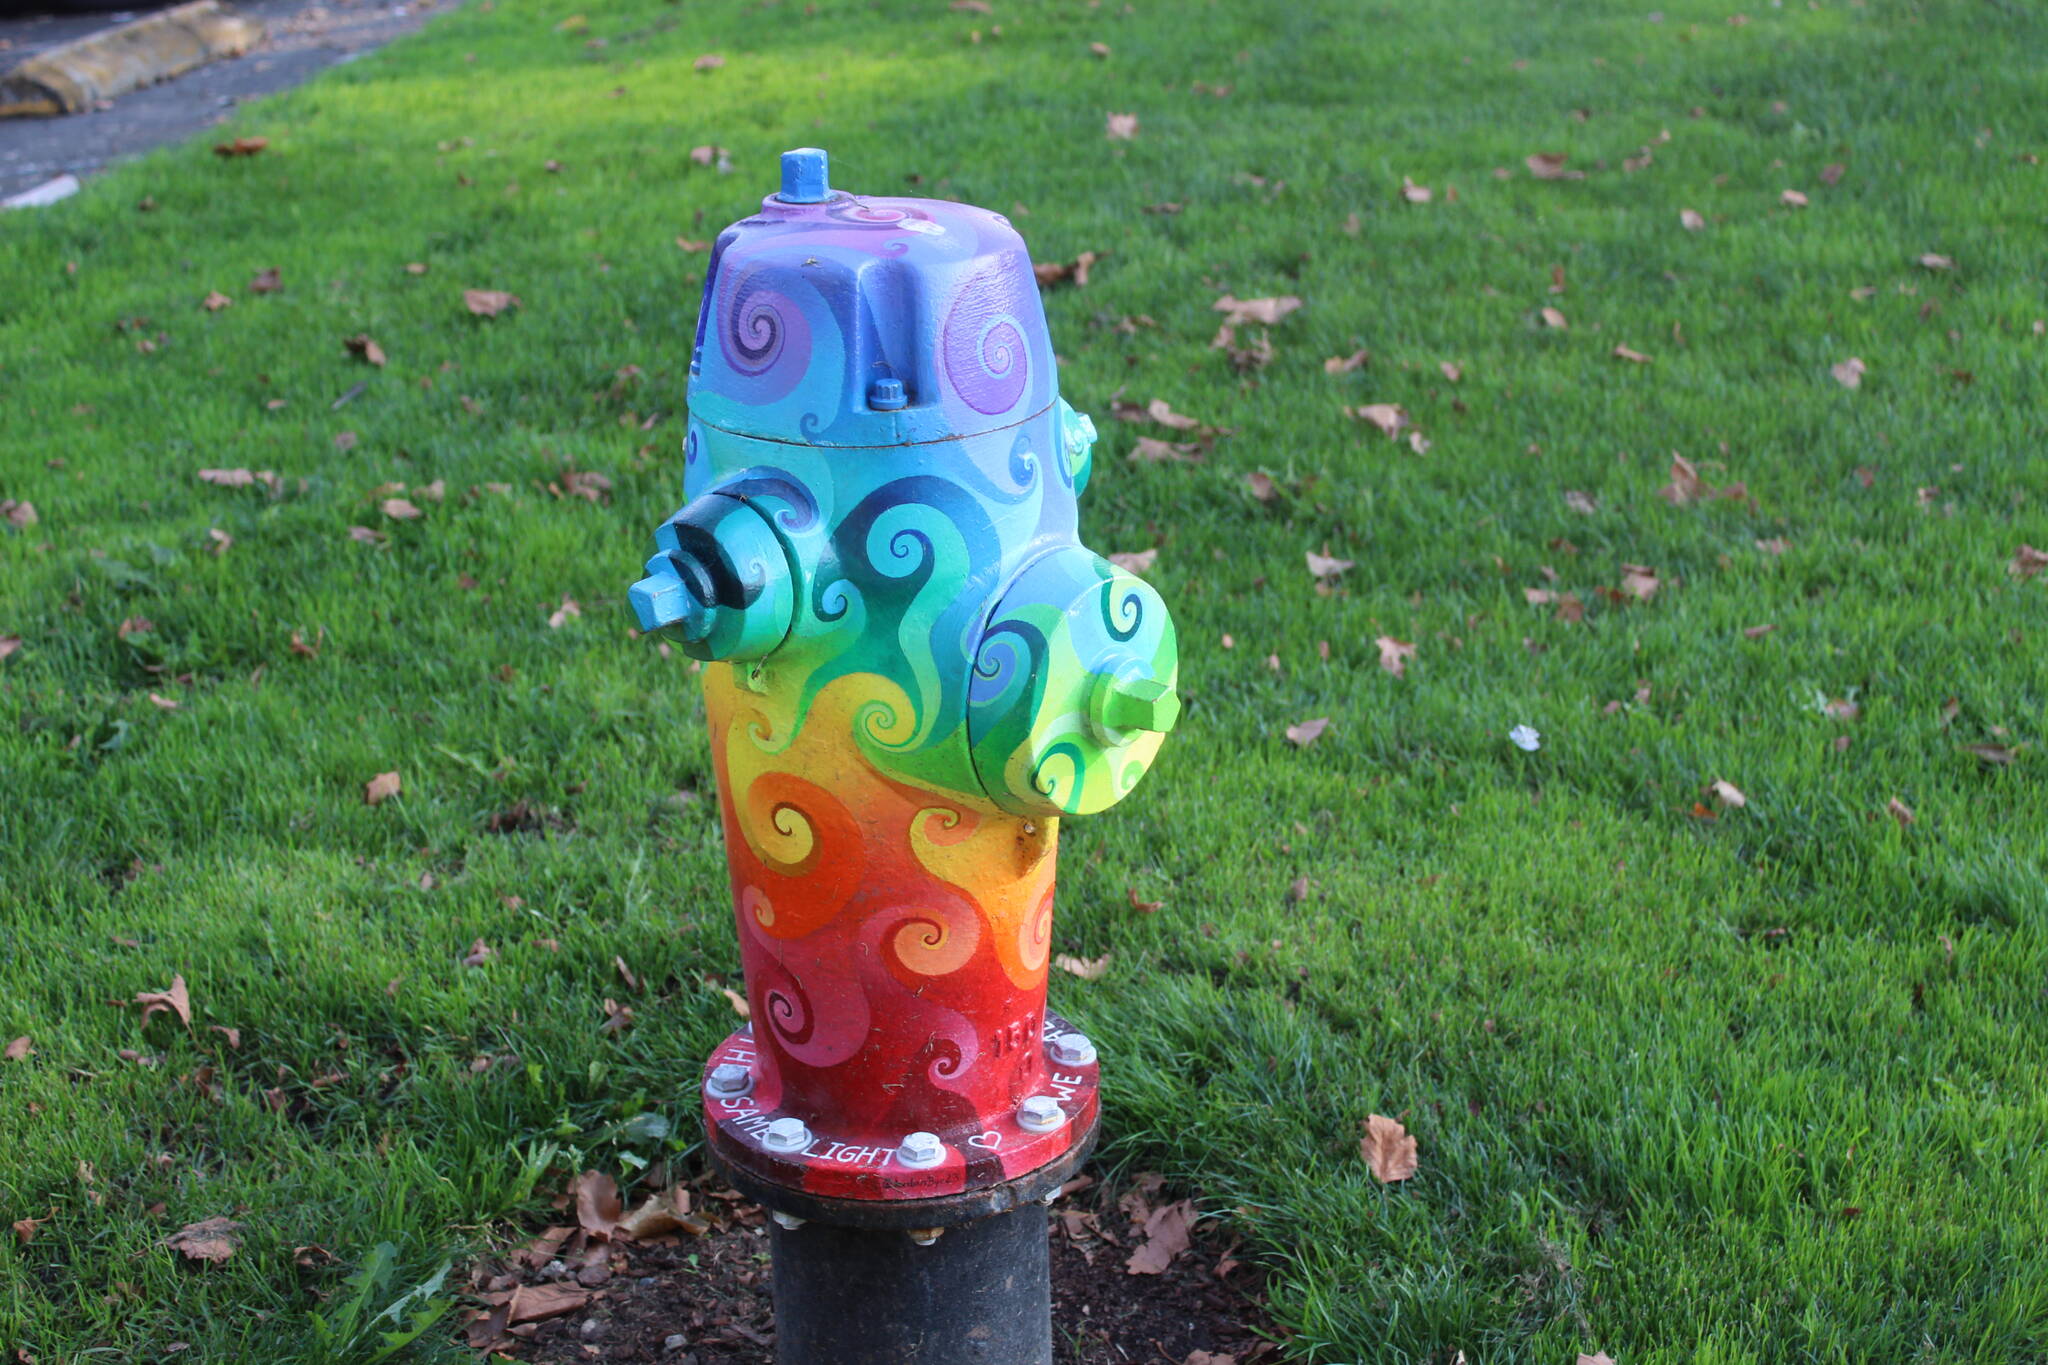 Painted fire hydrants have become a staple of South Renton. Photo by Bailey Jo Josie/Sound Publishing